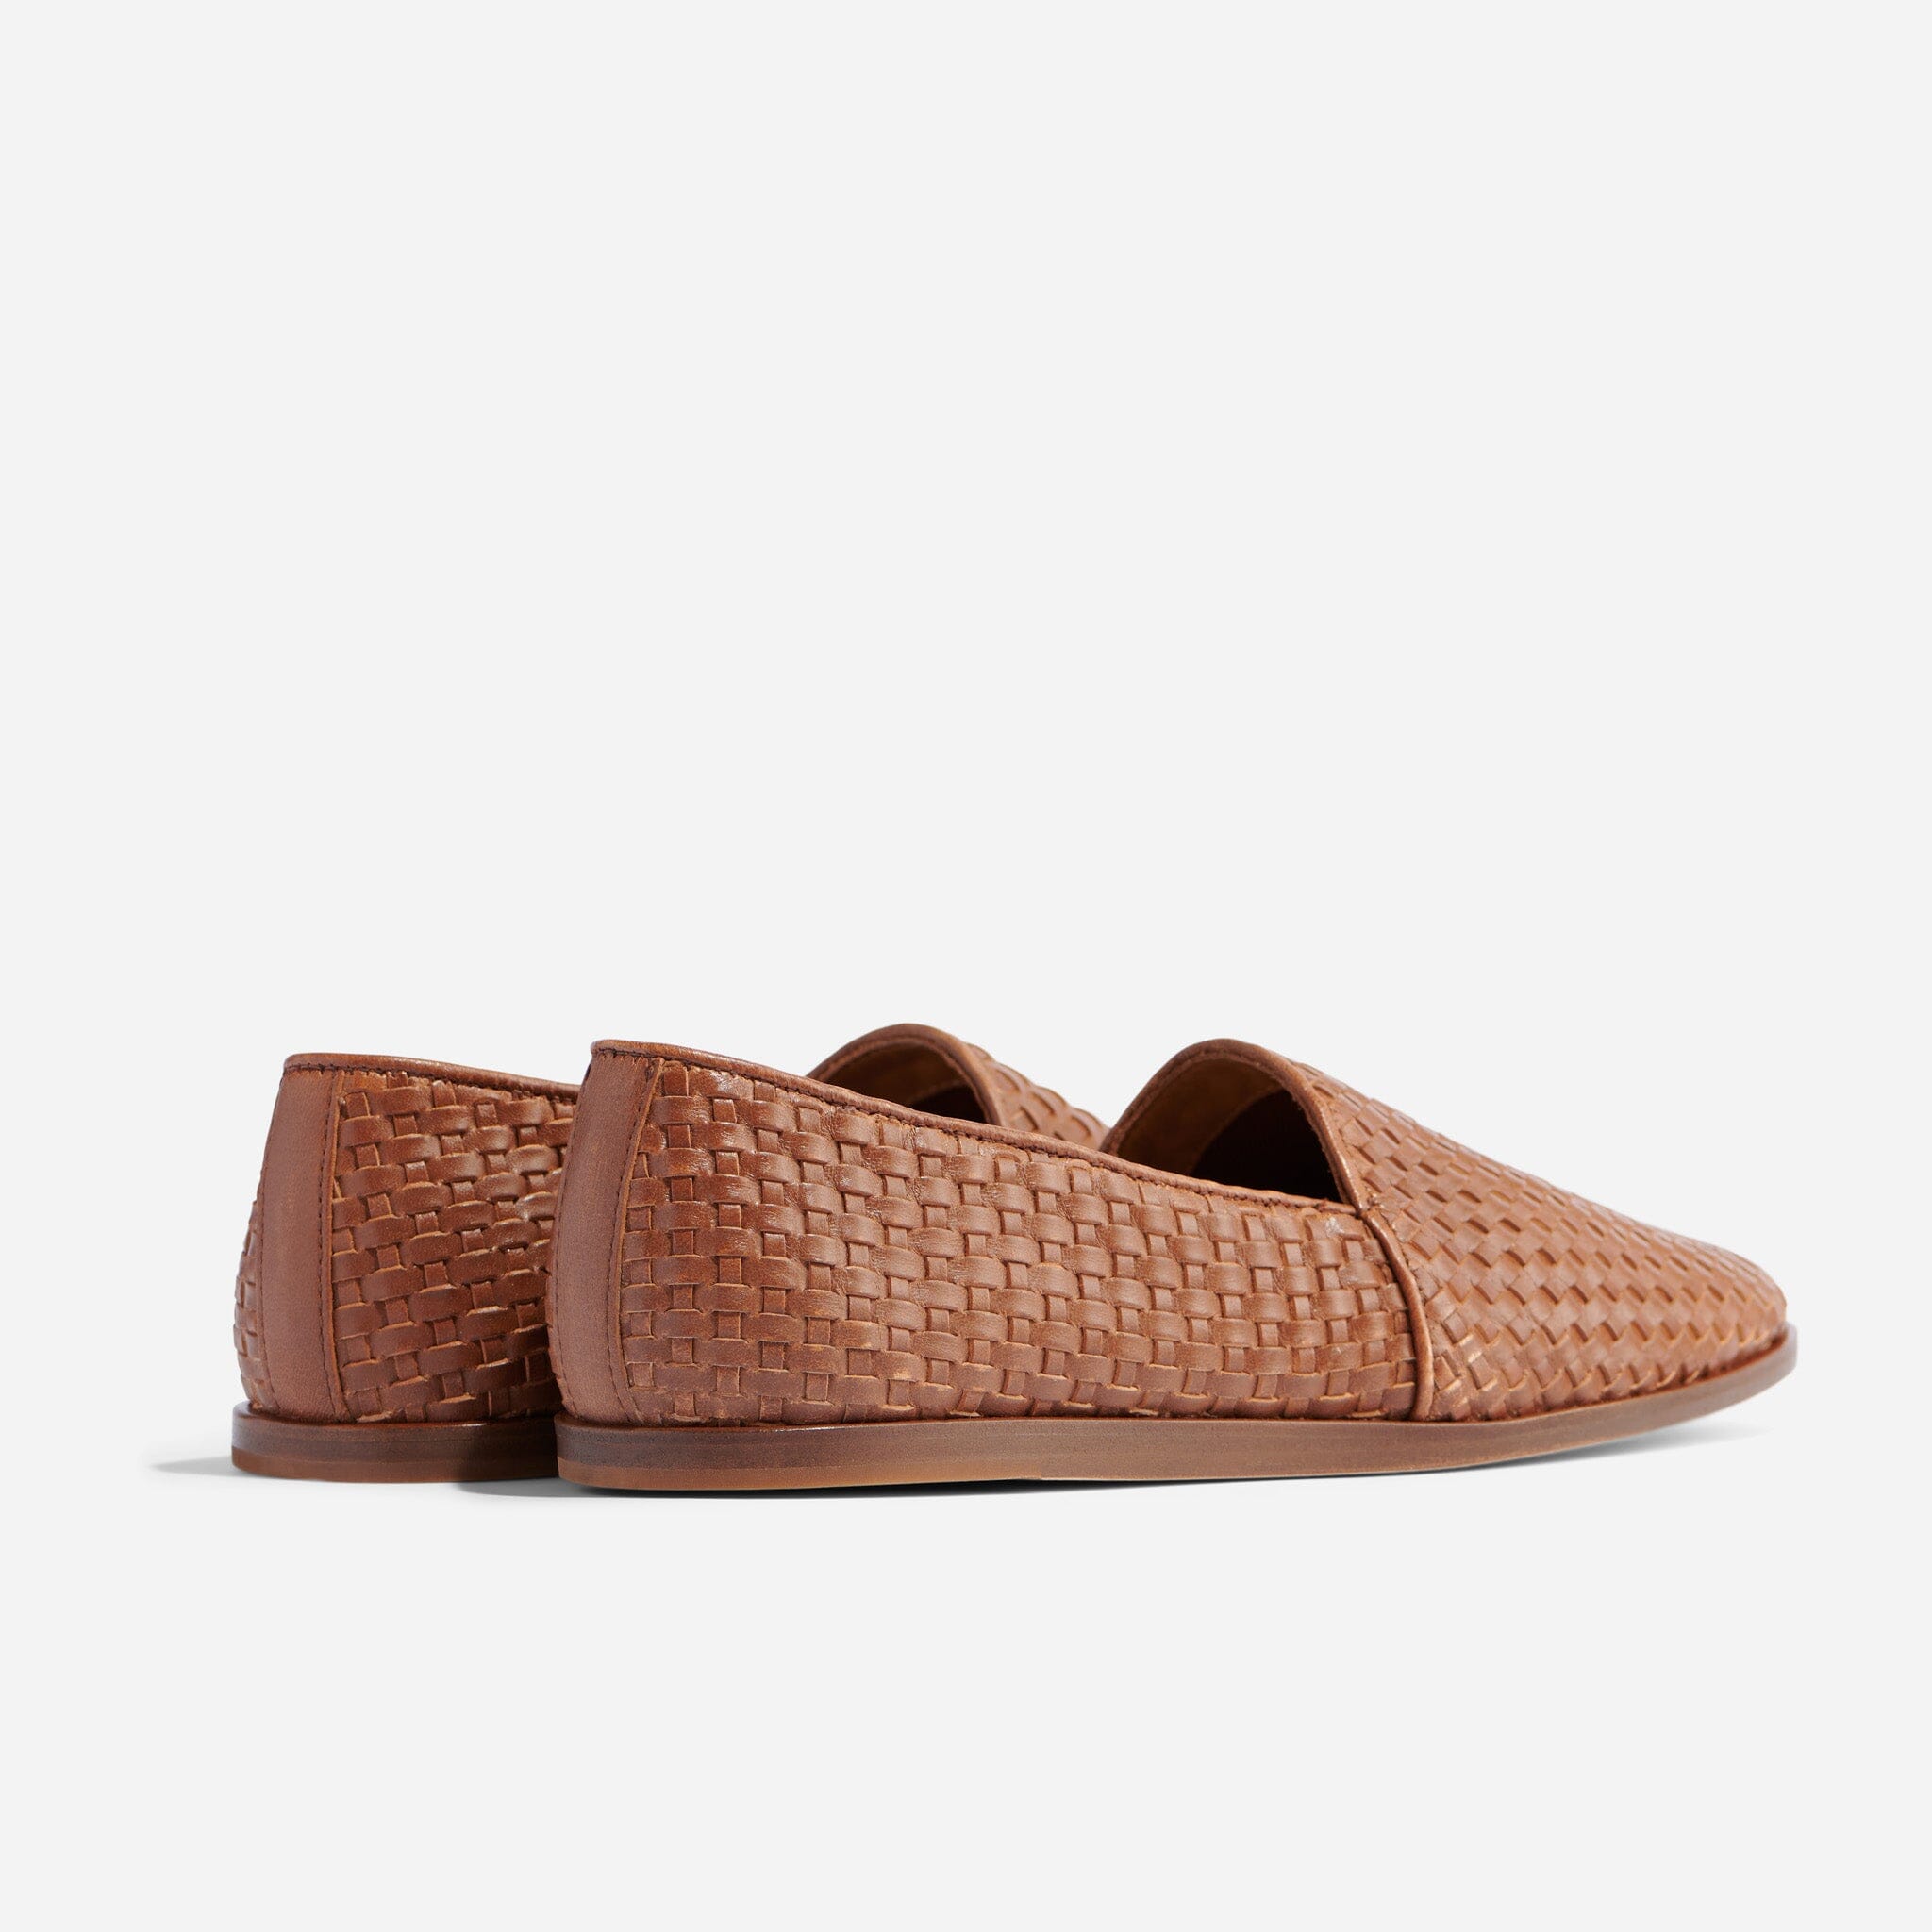 lv loafer - Loafers & Slip-Ons Prices and Promotions - Men Shoes